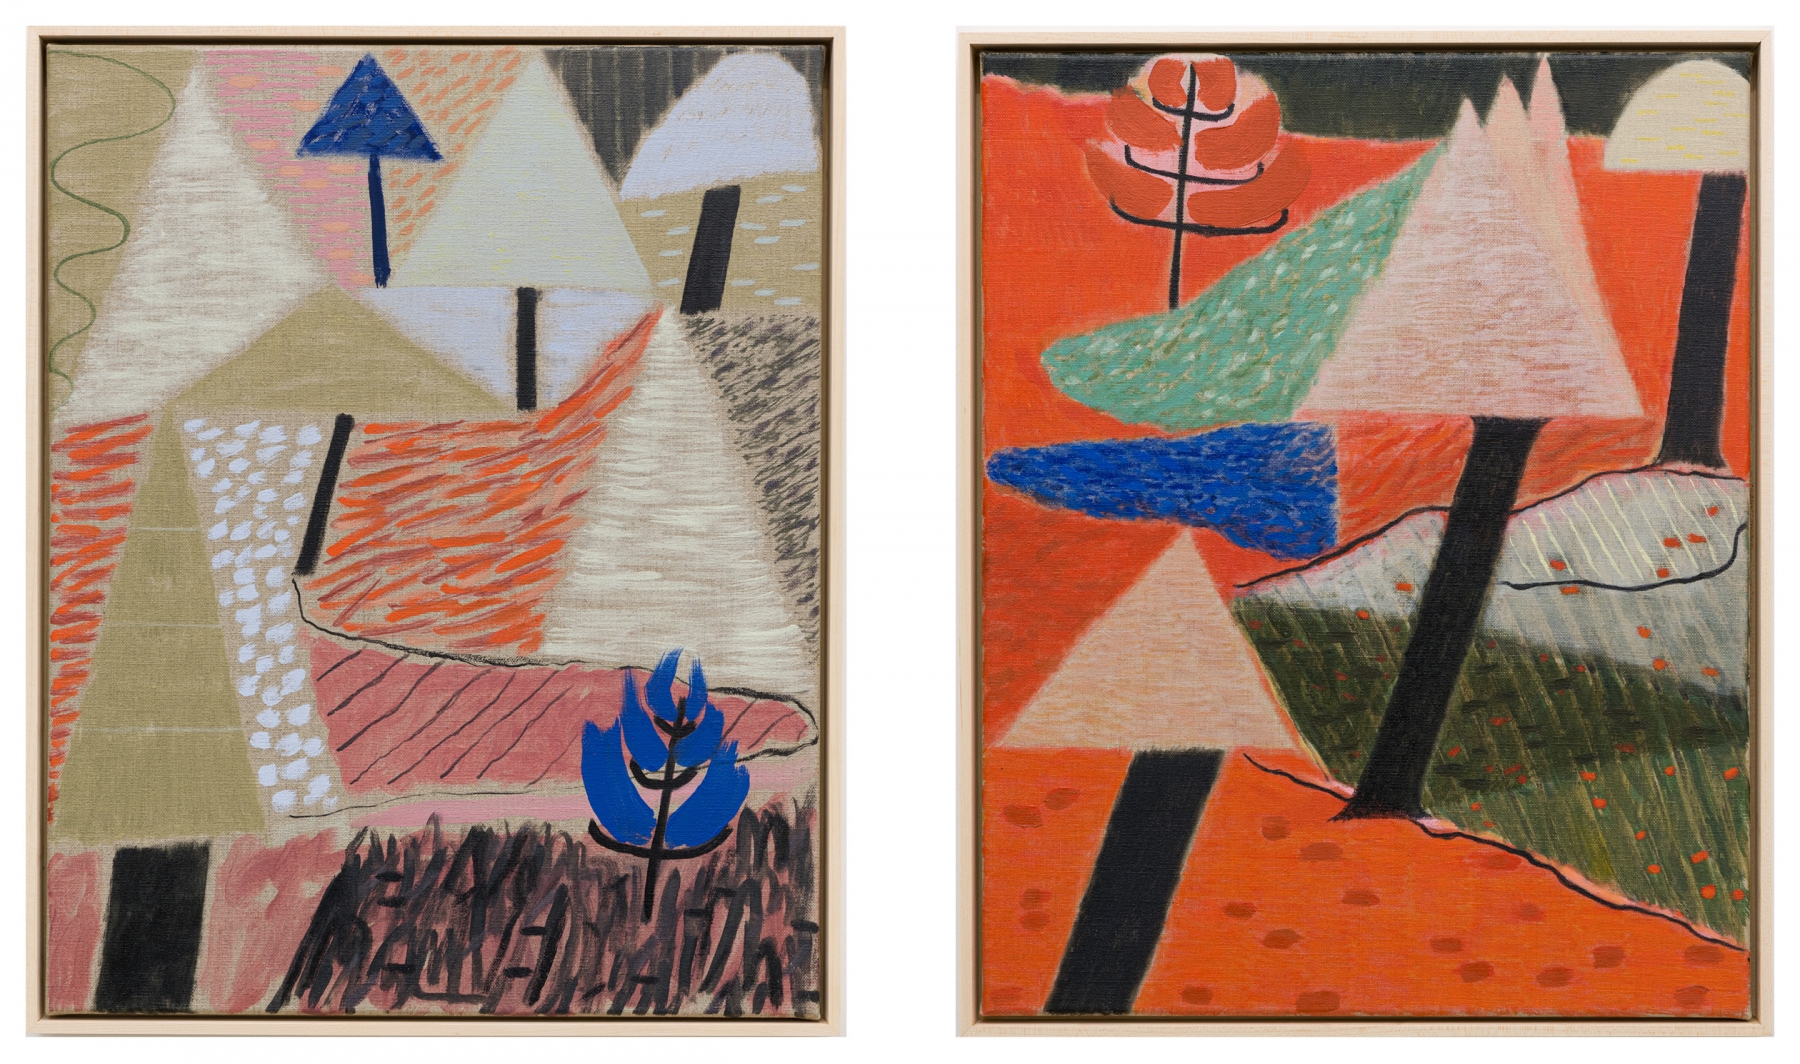 Left:&nbsp;Rob Lyon,&nbsp;Febrile in the valley, 2021,&nbsp;oil on linen,&nbsp;19 11/16h x 15 3/4w in

Right:&nbsp;Rob Lyon,&nbsp;Reds, lineage, a frenzy, 2021,&nbsp;oil on linen,&nbsp;19 11/16h x 15 3/4w in

Inquire